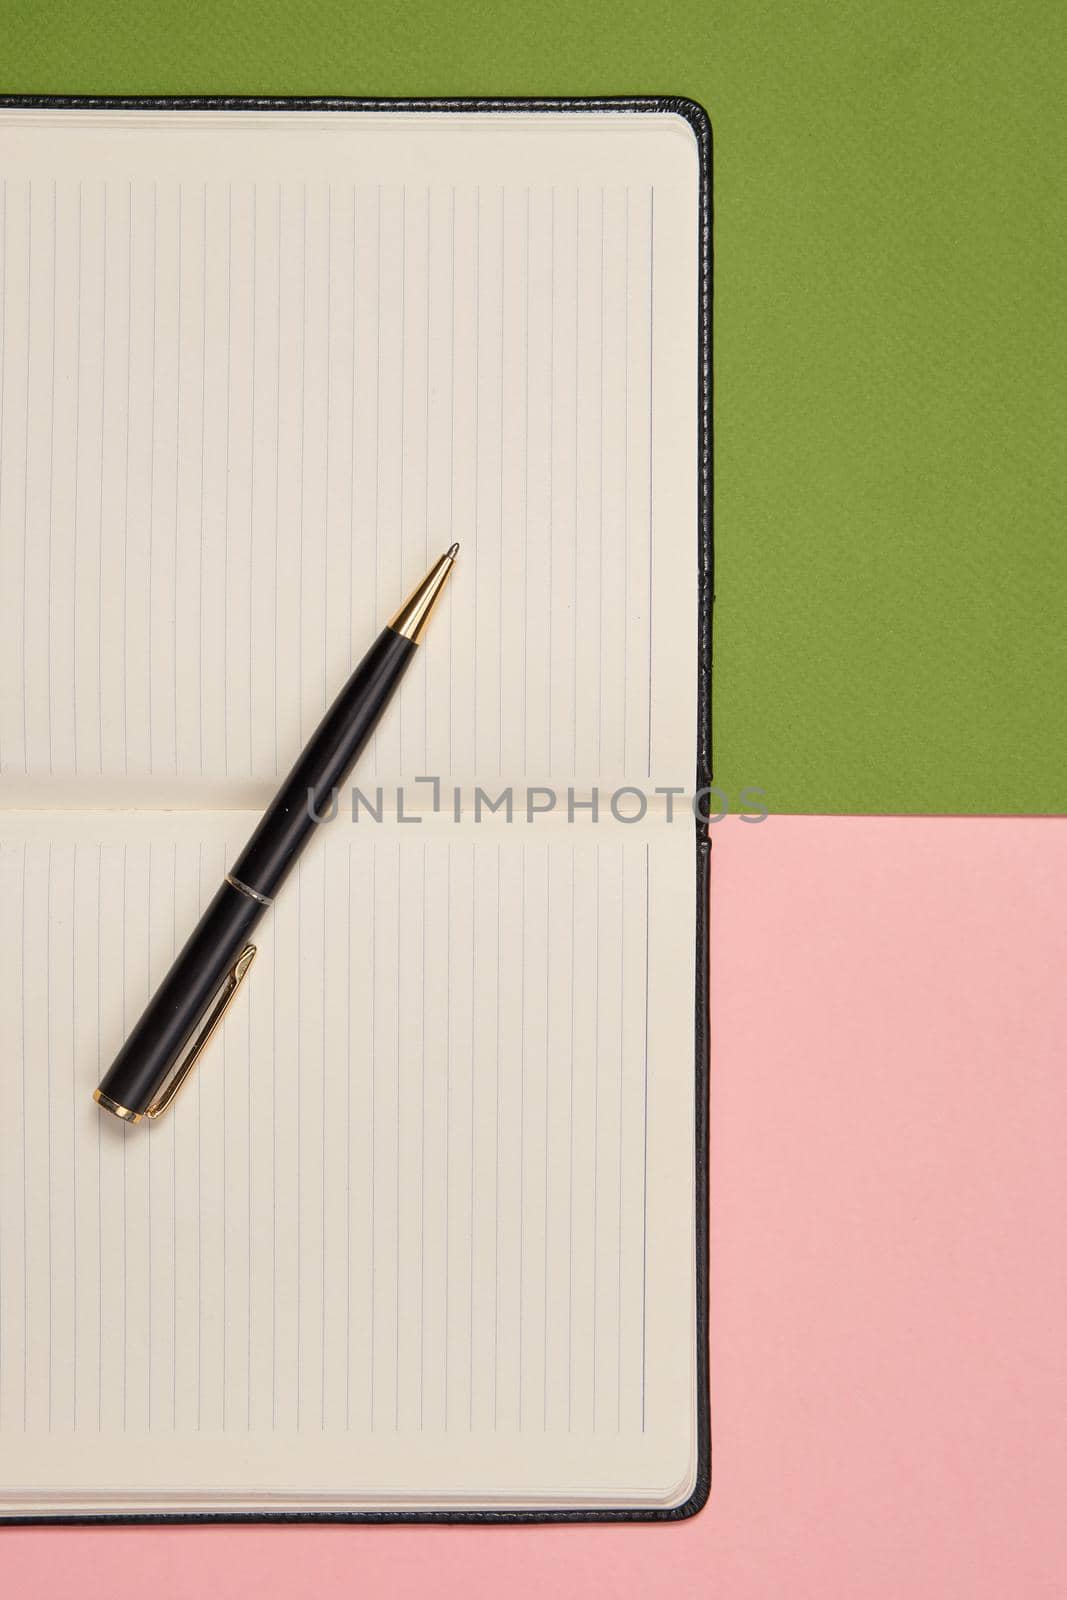 notepad documents office accessories tools business top view by Vichizh